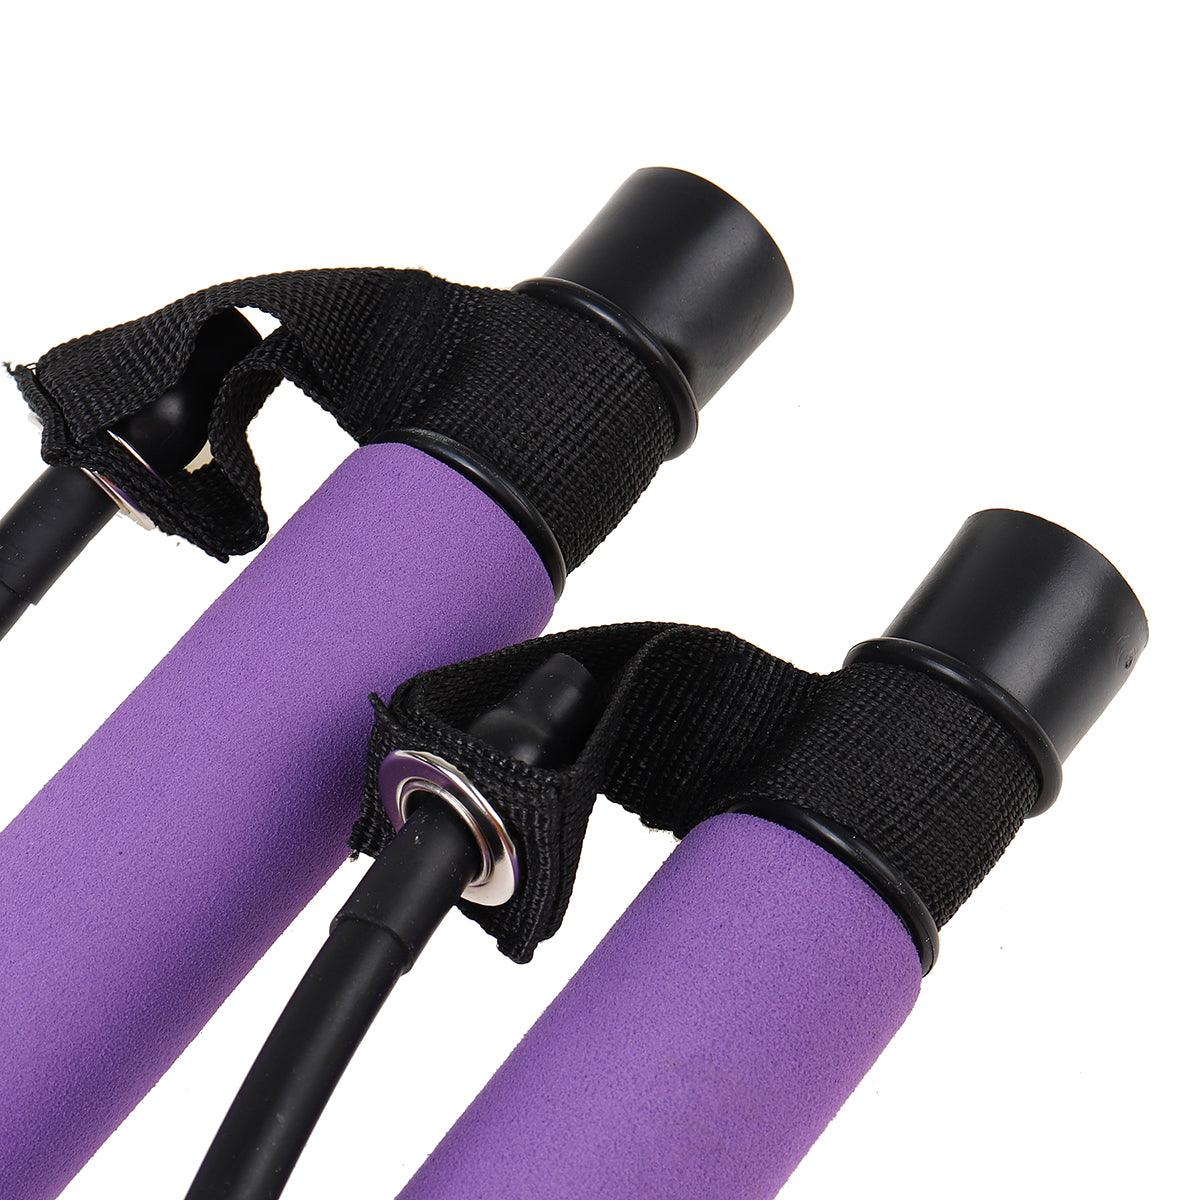 Multifunctional Portable Pilates Bar Fitness Stick Yoga Resistance Bands Home Gym Exercise Tools